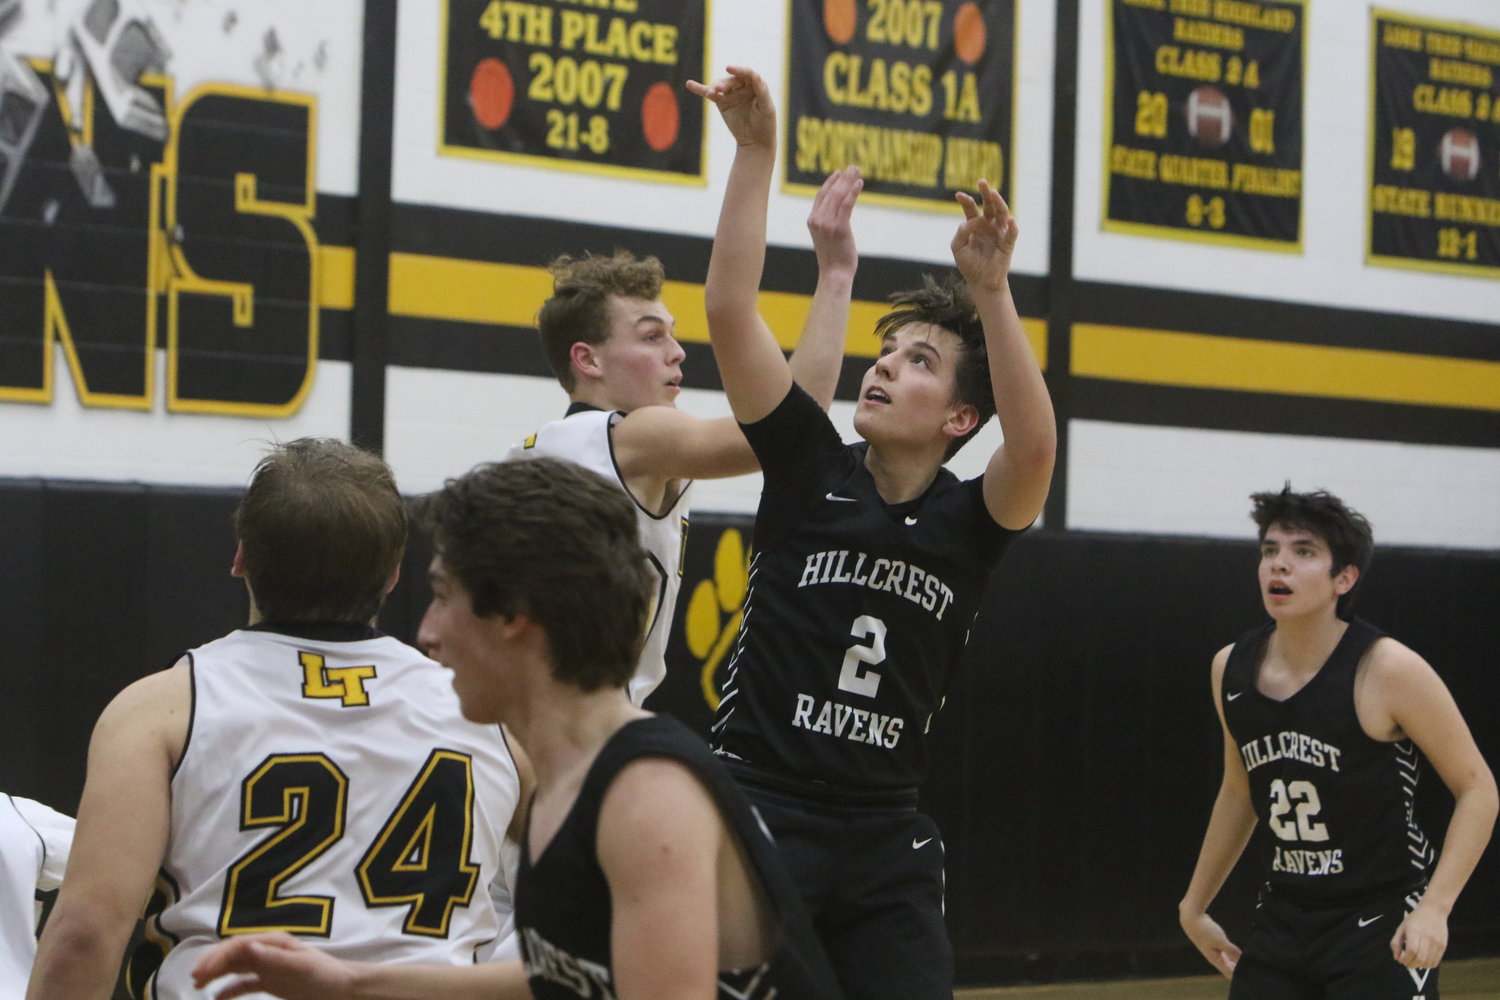 Seth Ours of Hillcrest takes a shot in Tuesday night's game at Lone Tree.